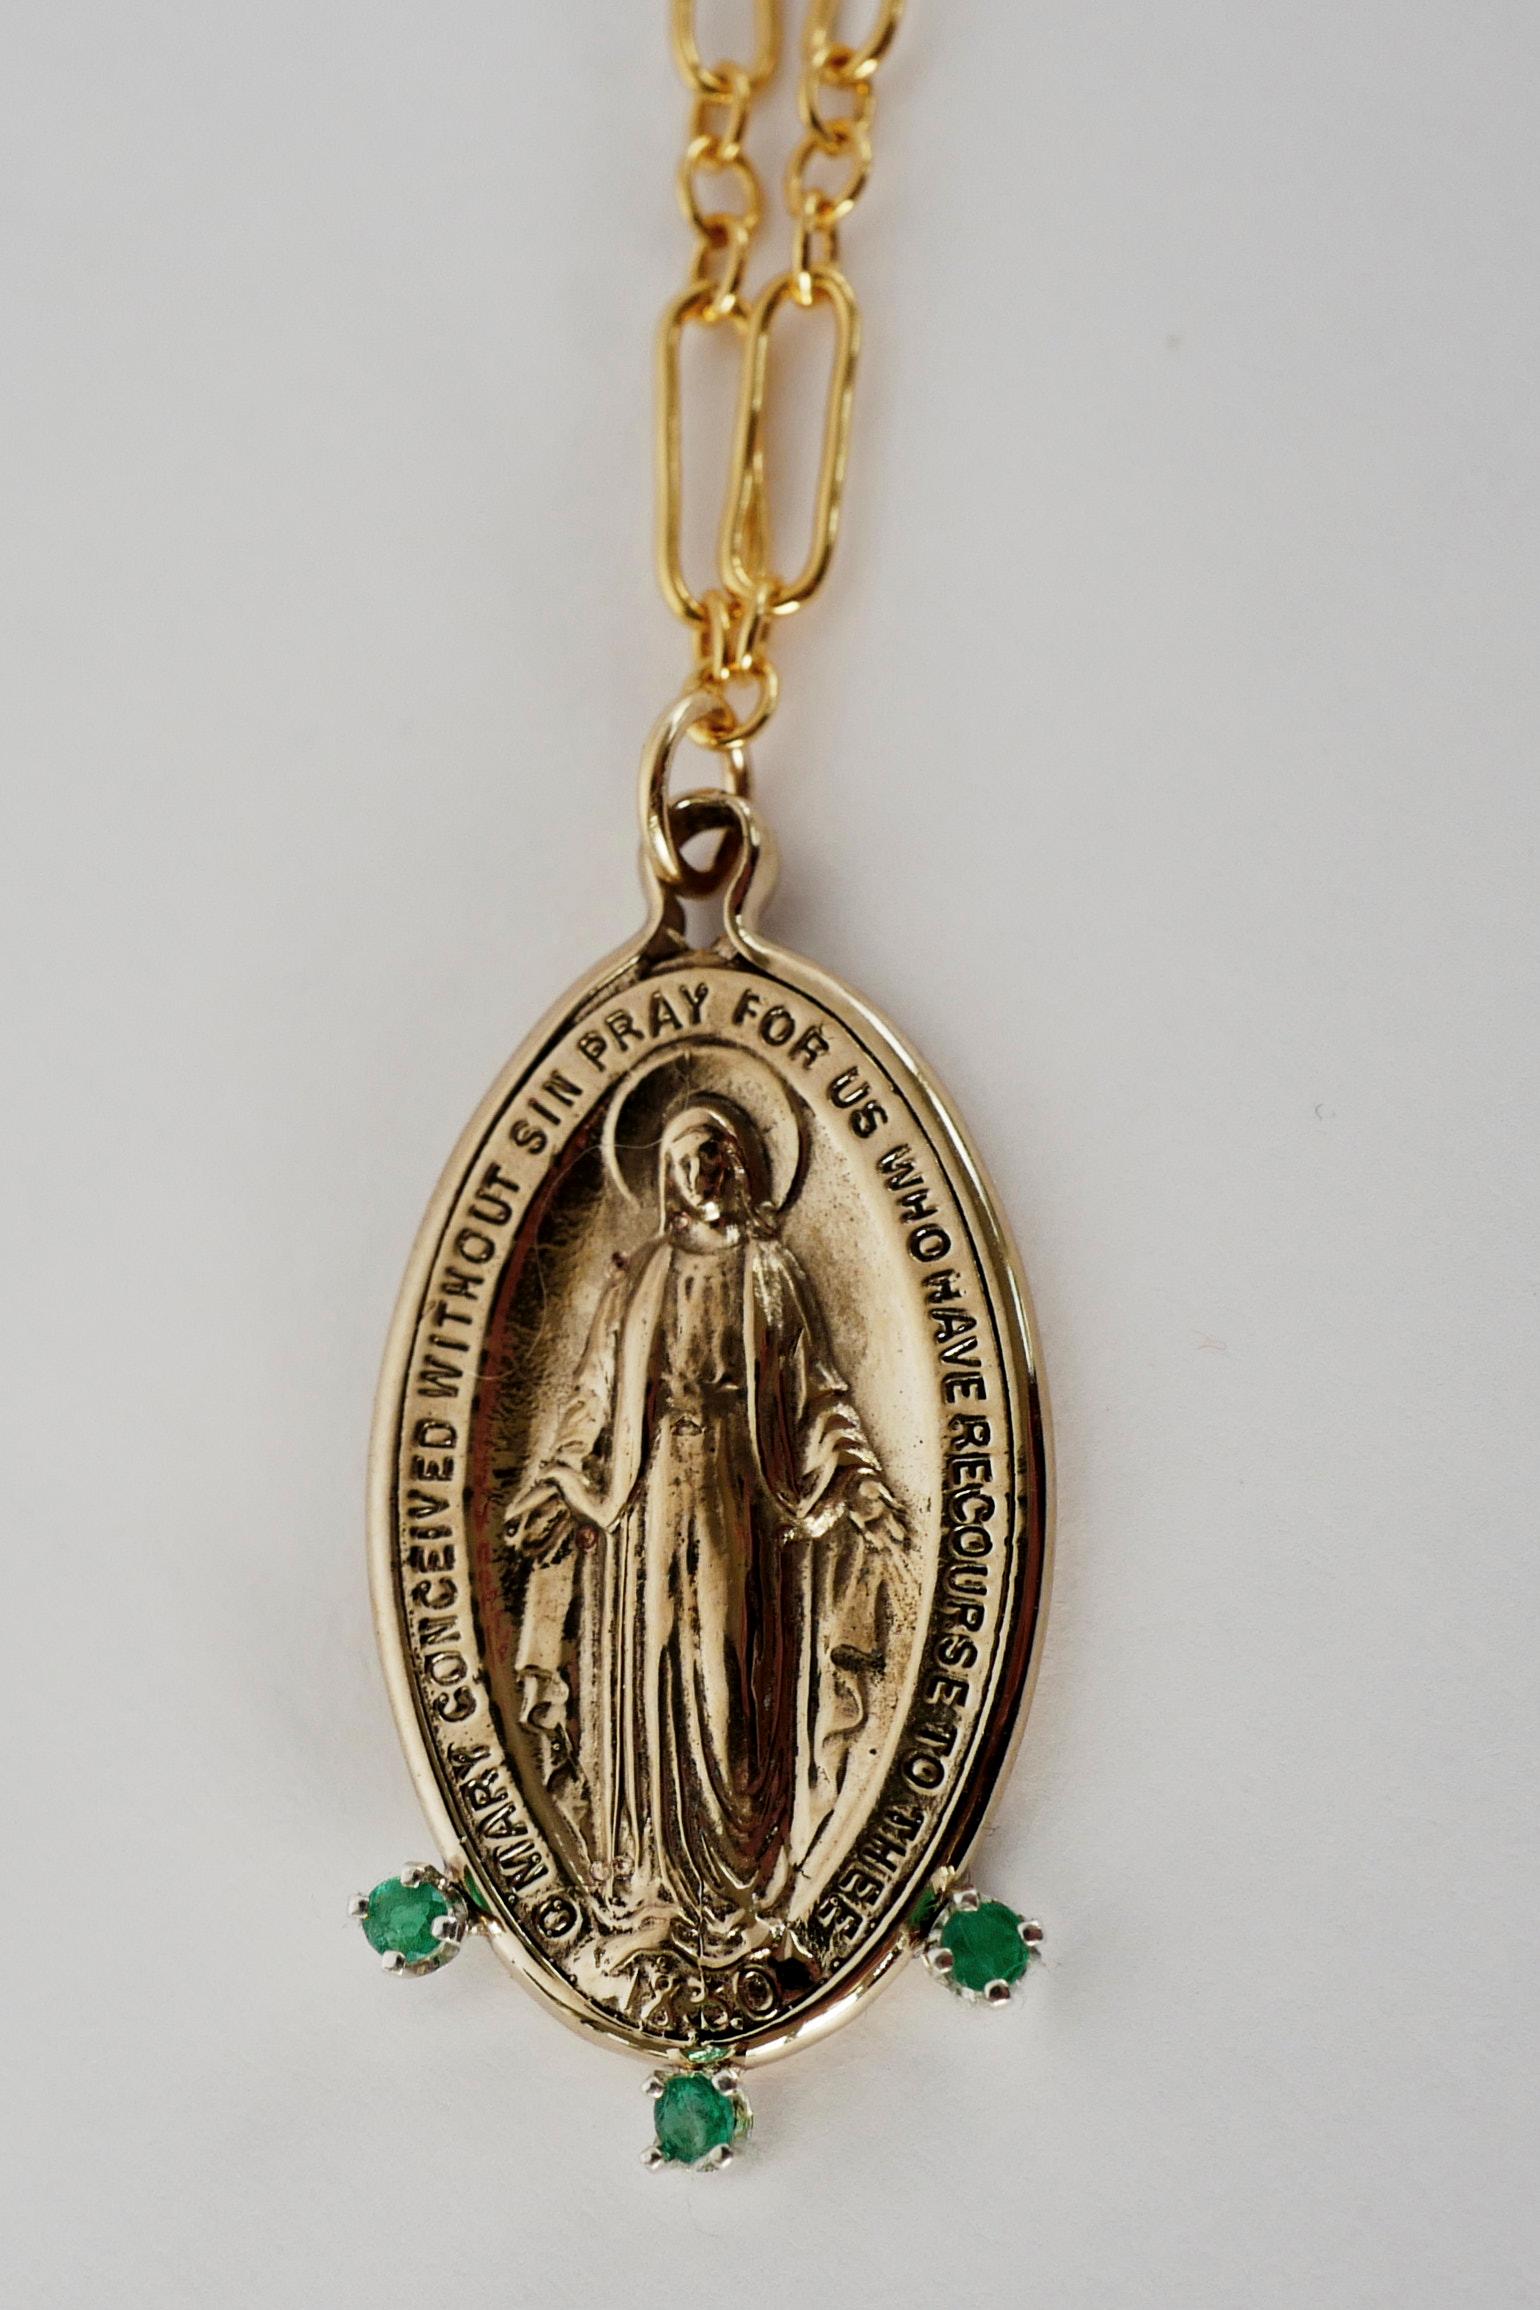 Brilliant Cut Chain Necklace Medal Virgin Mary Miraculous Opals Oval Pendant Bronze J Dauphin For Sale